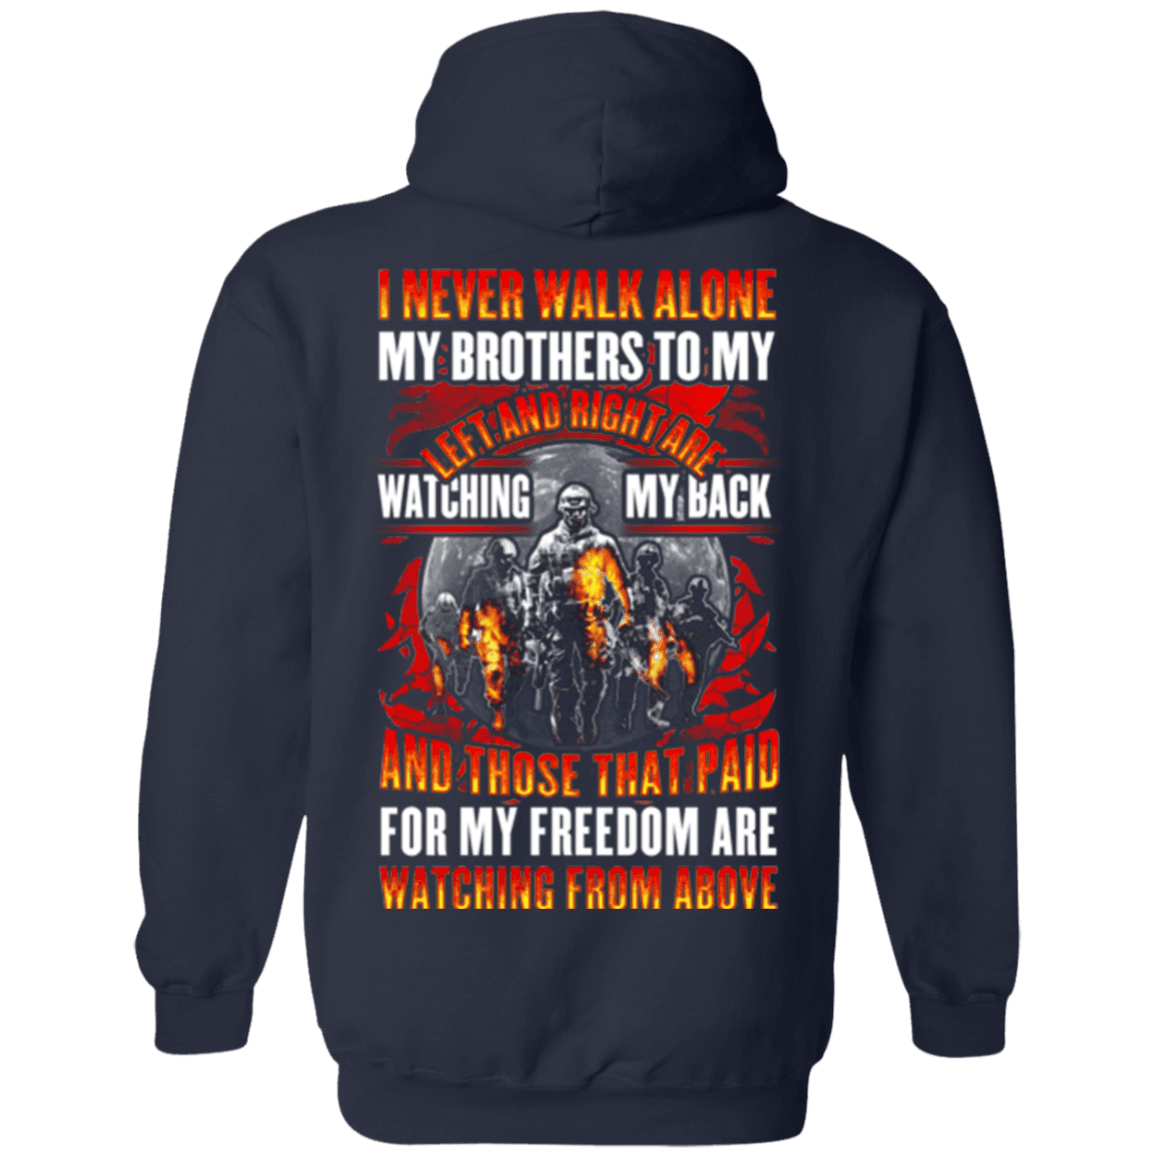 Military T-Shirt "Veteran - My Brothers Watching My Back, My Freedom Watching From Above"-TShirt-General-Veterans Nation